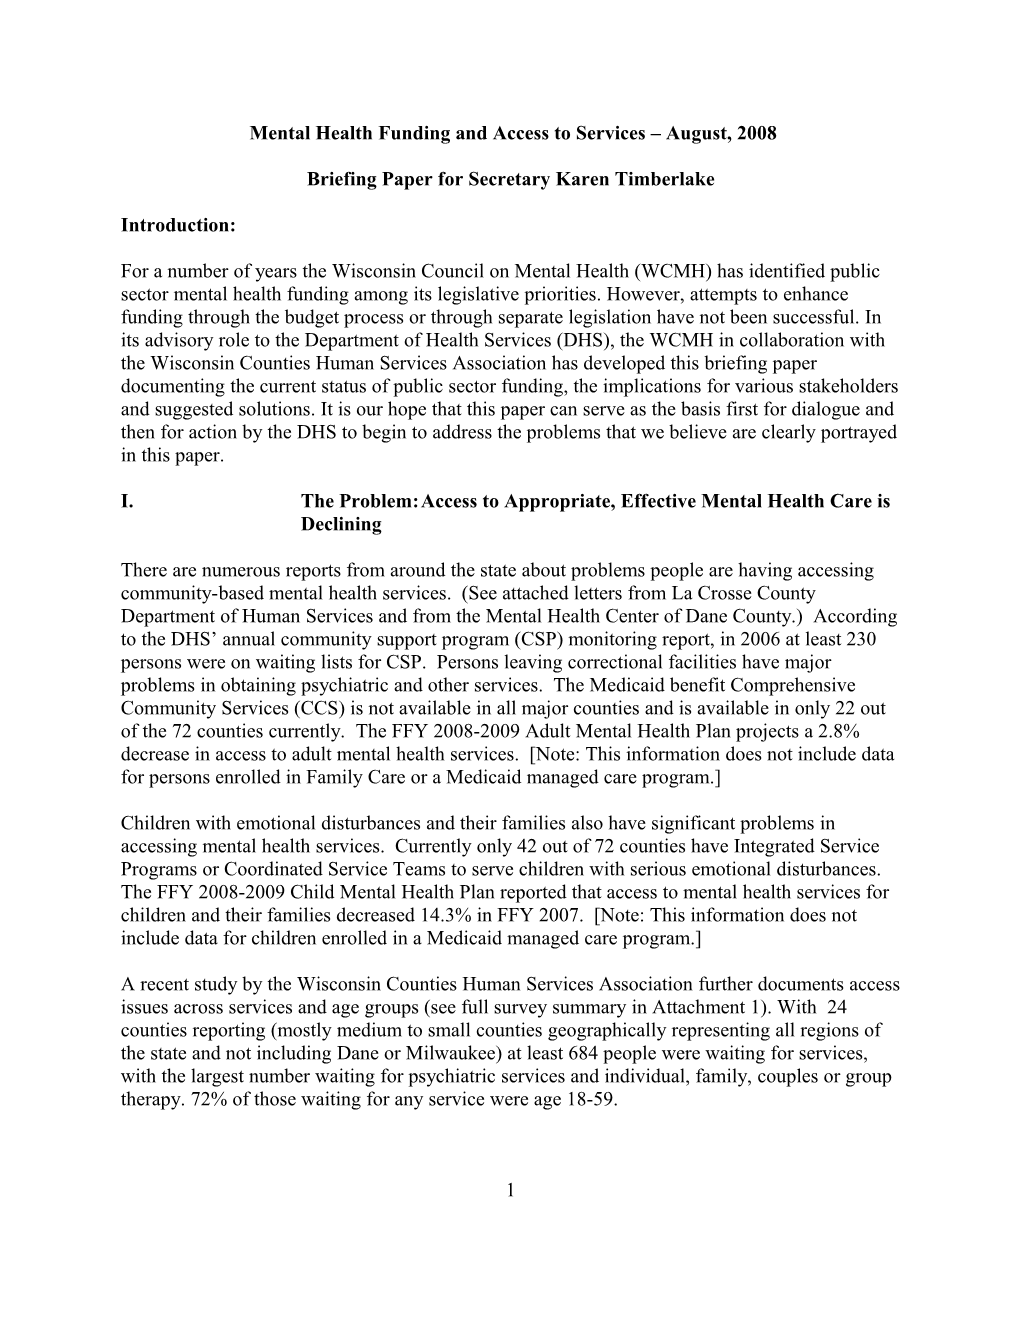 Second Draft - Paper on Mental Health Funding and Access to Services